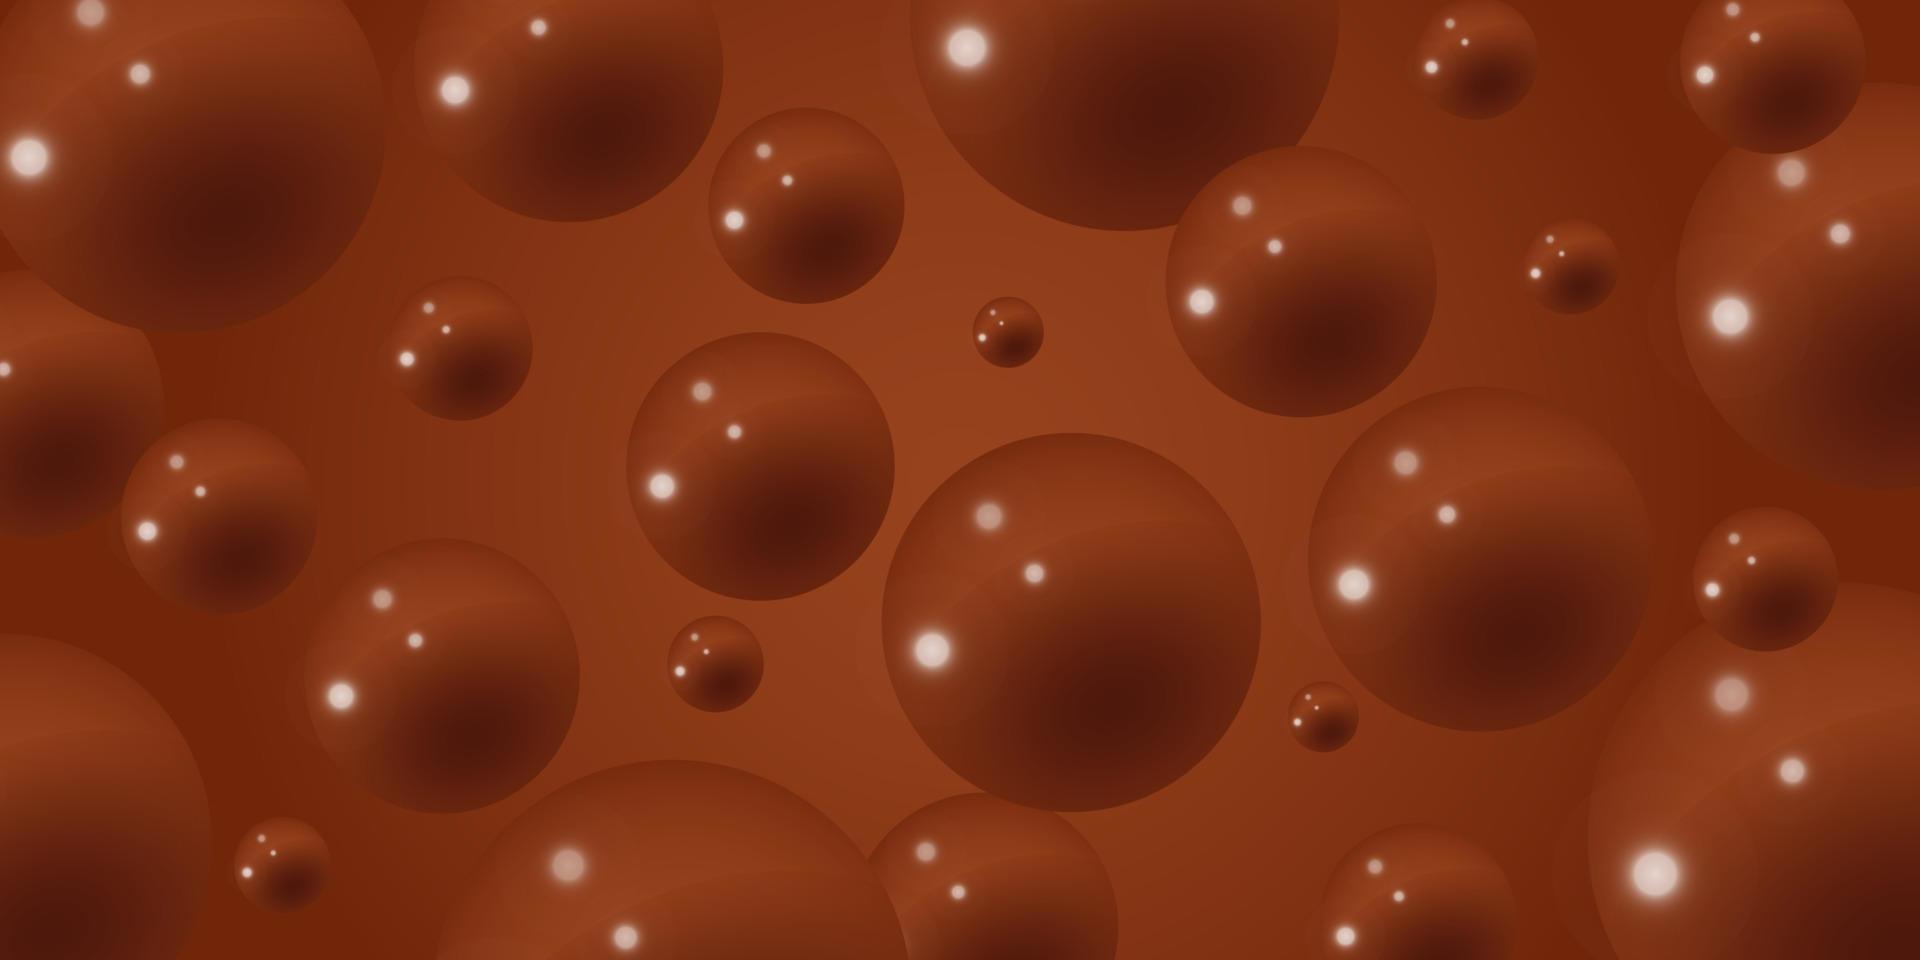 Sweet liquid chocolate background 3d. Hot cocoa with splashes banner. Brown chocolate background with bubbles. Vector illustration.